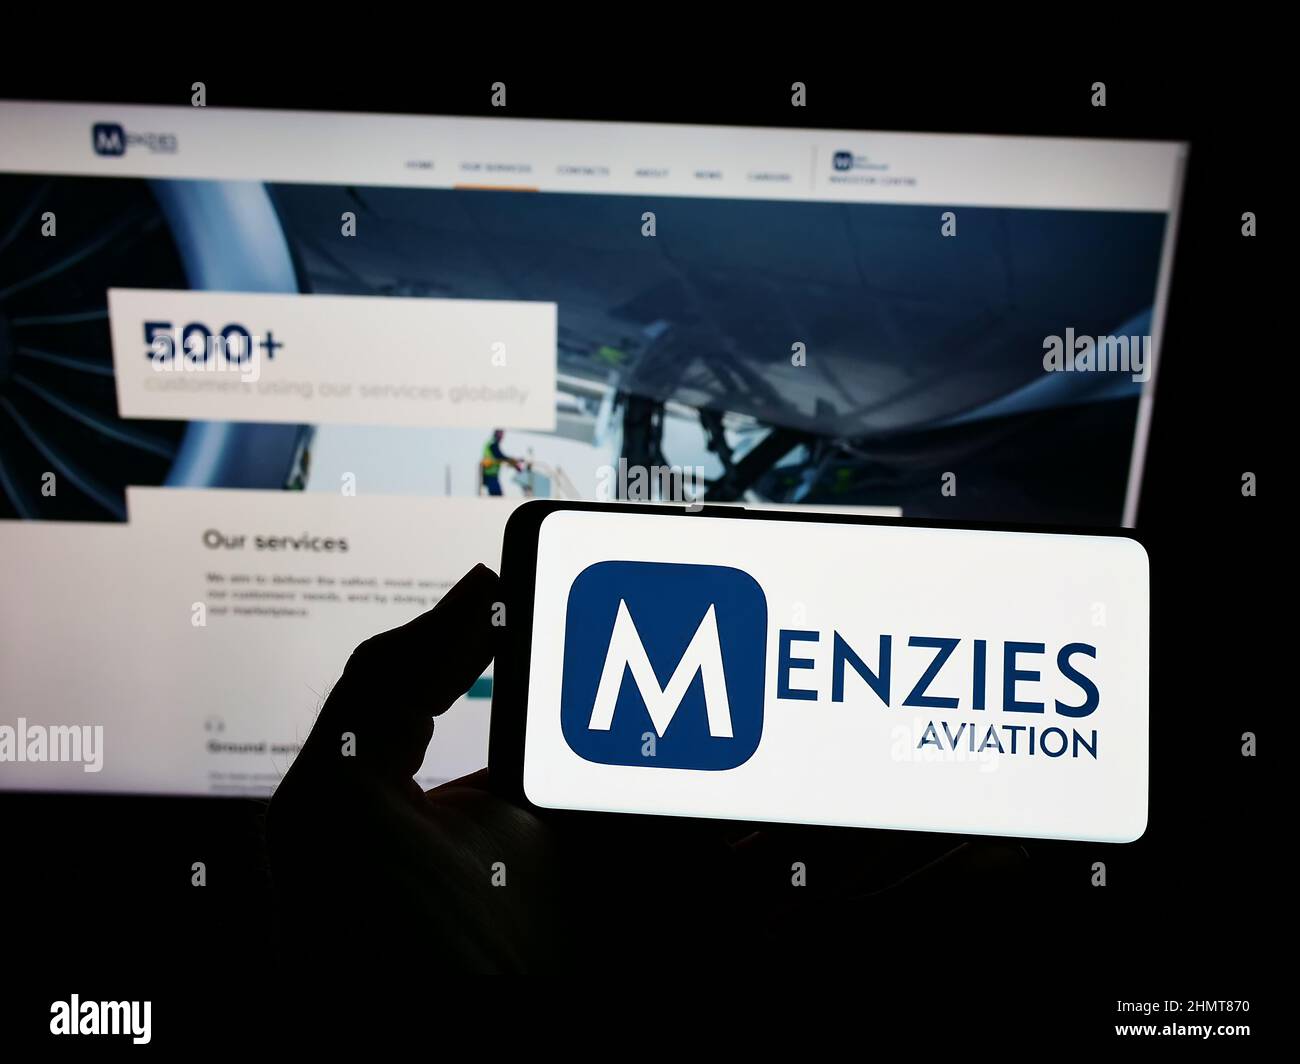 Person holding smartphone with logo of British aviation company John Menzies plc on screen in front of website. Focus on phone display. Stock Photo